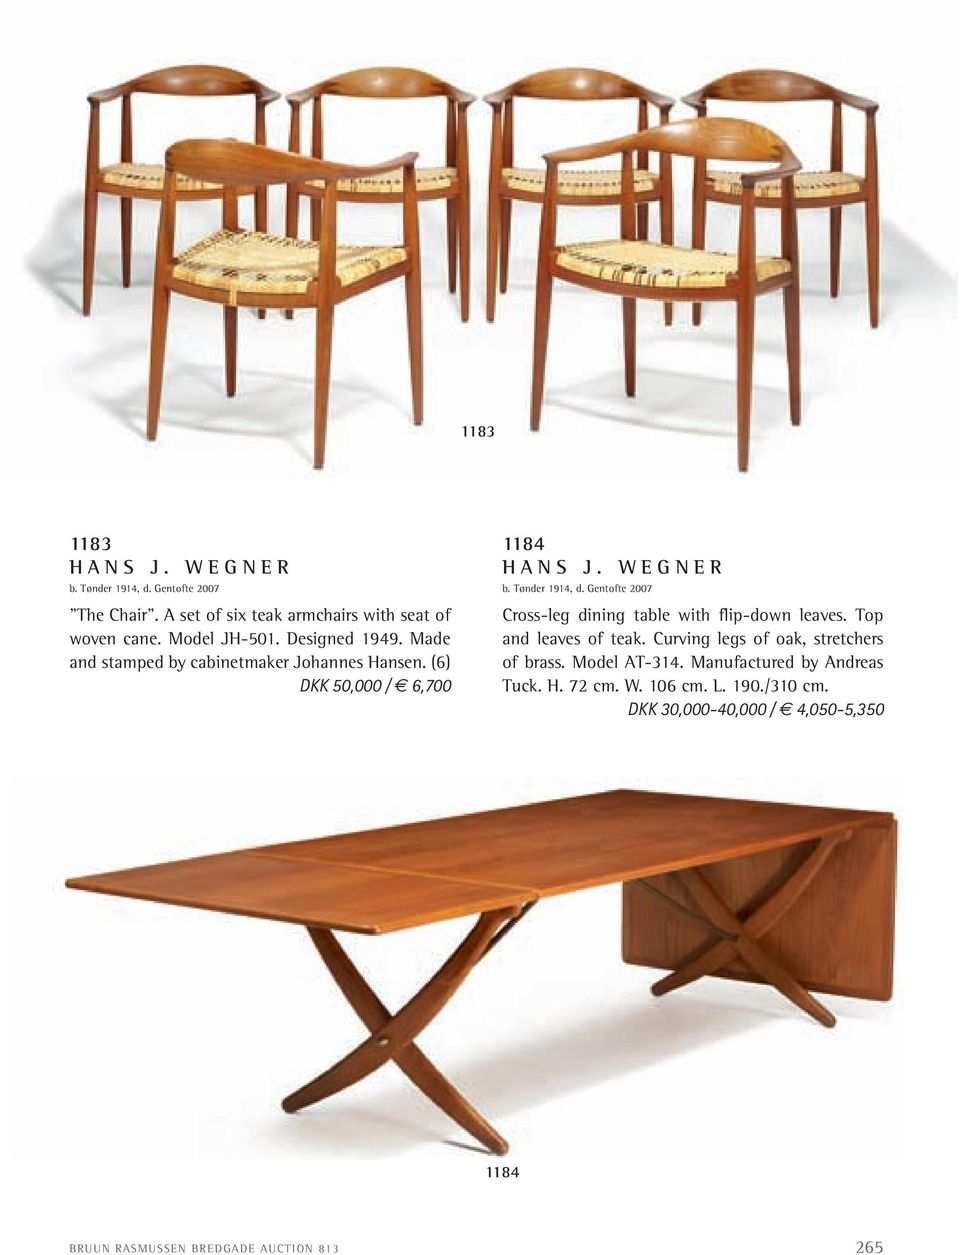 gentofte 2007 cross-leg dining table with flip-down leaves. Top and leaves of teak. curving legs of oak, stretchers of brass.